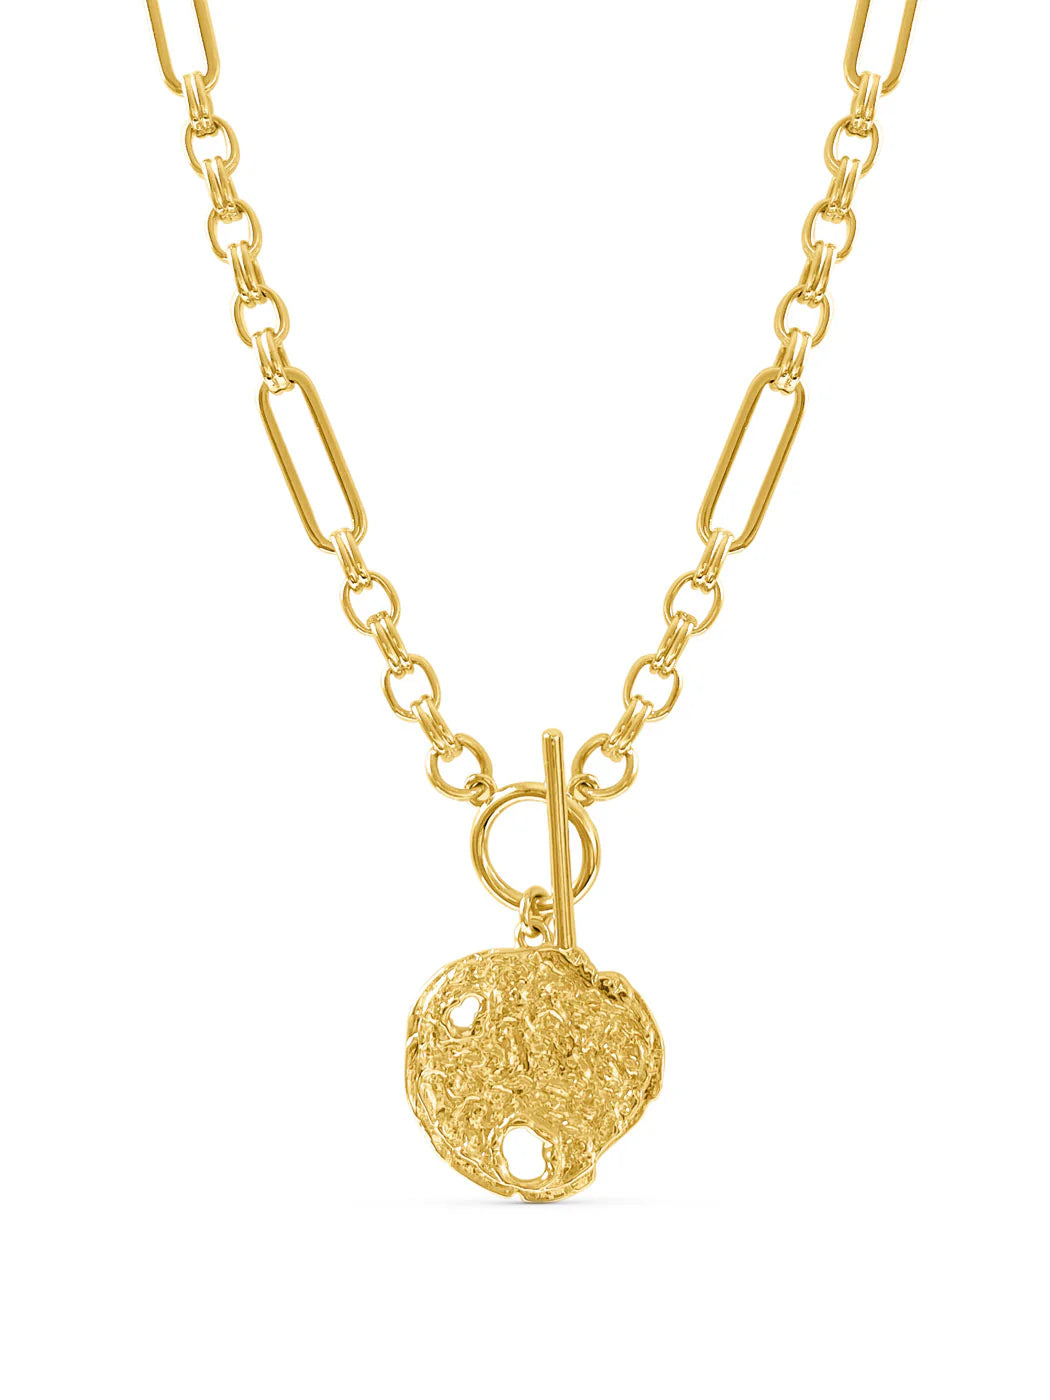 Tidal Necklace - Gold Plating